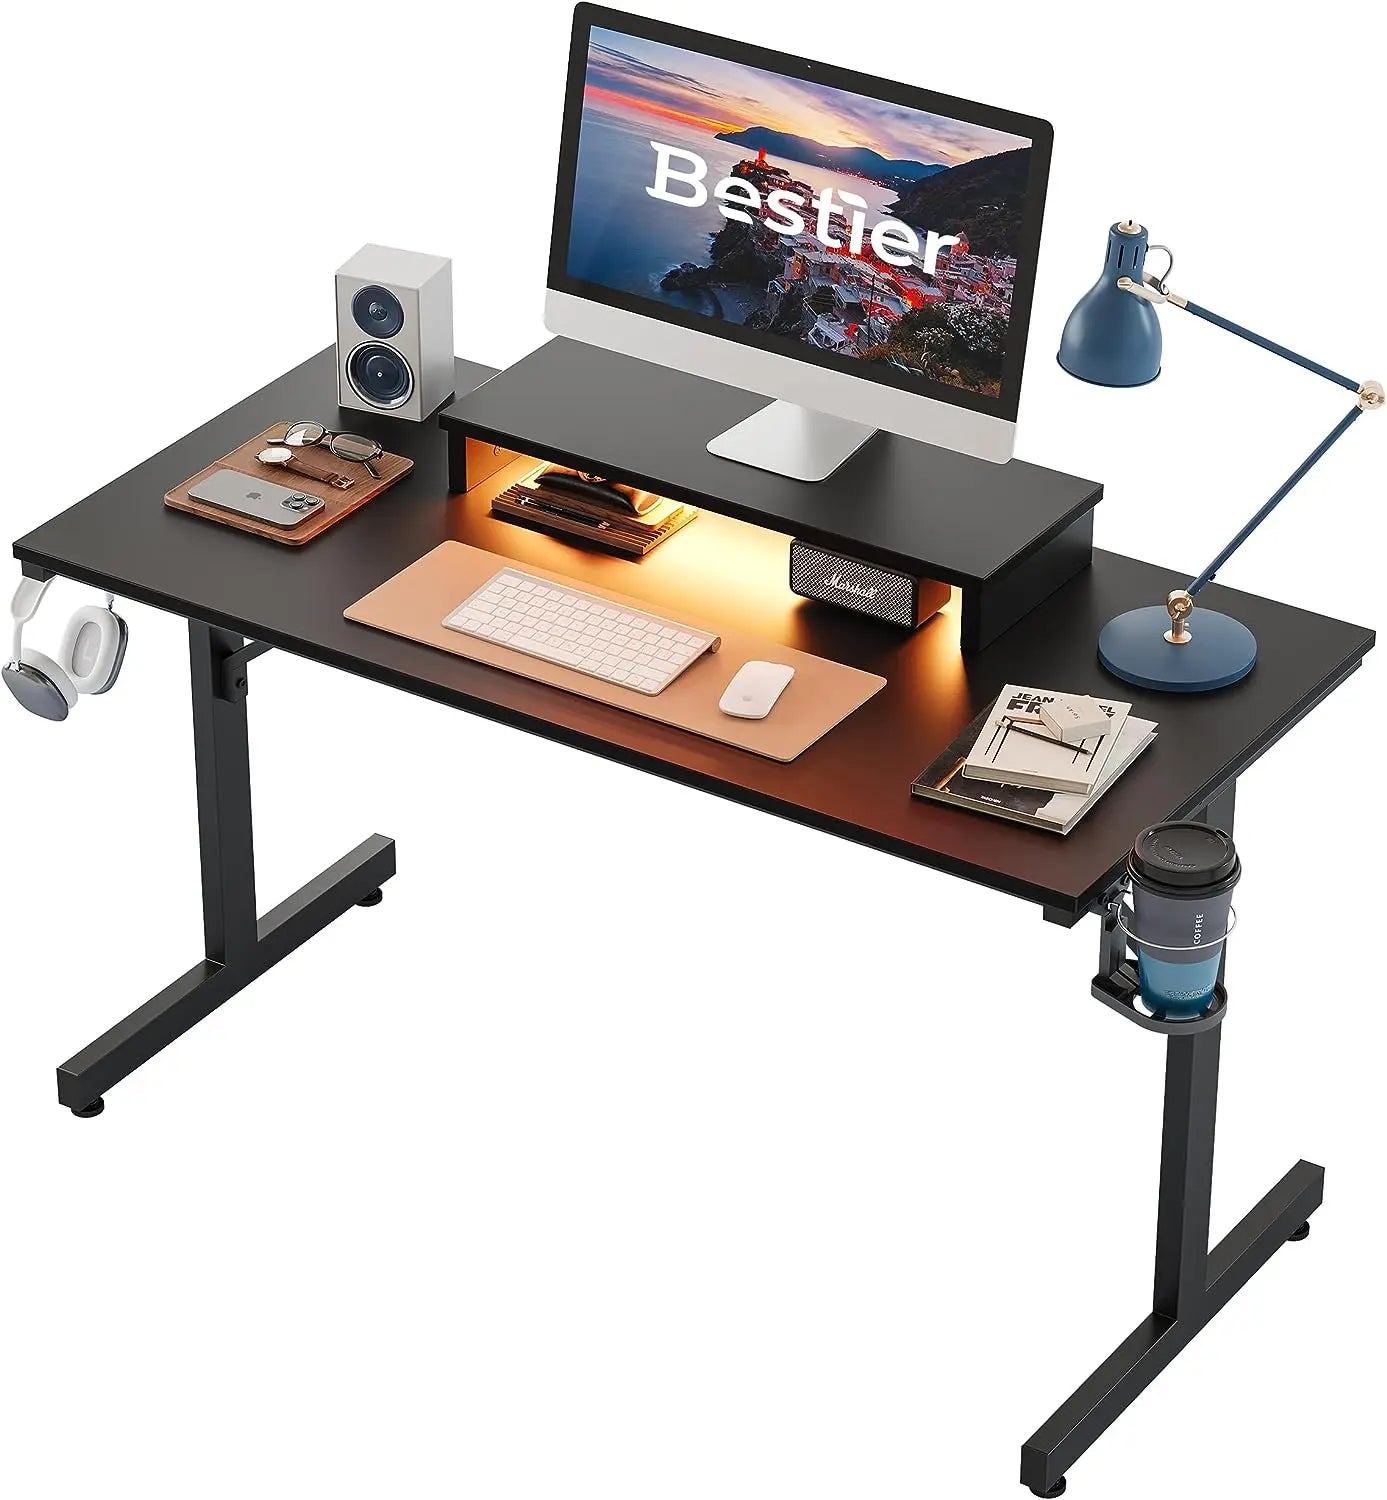 Bestier Small Gaming Desk with Monitor Stand of black